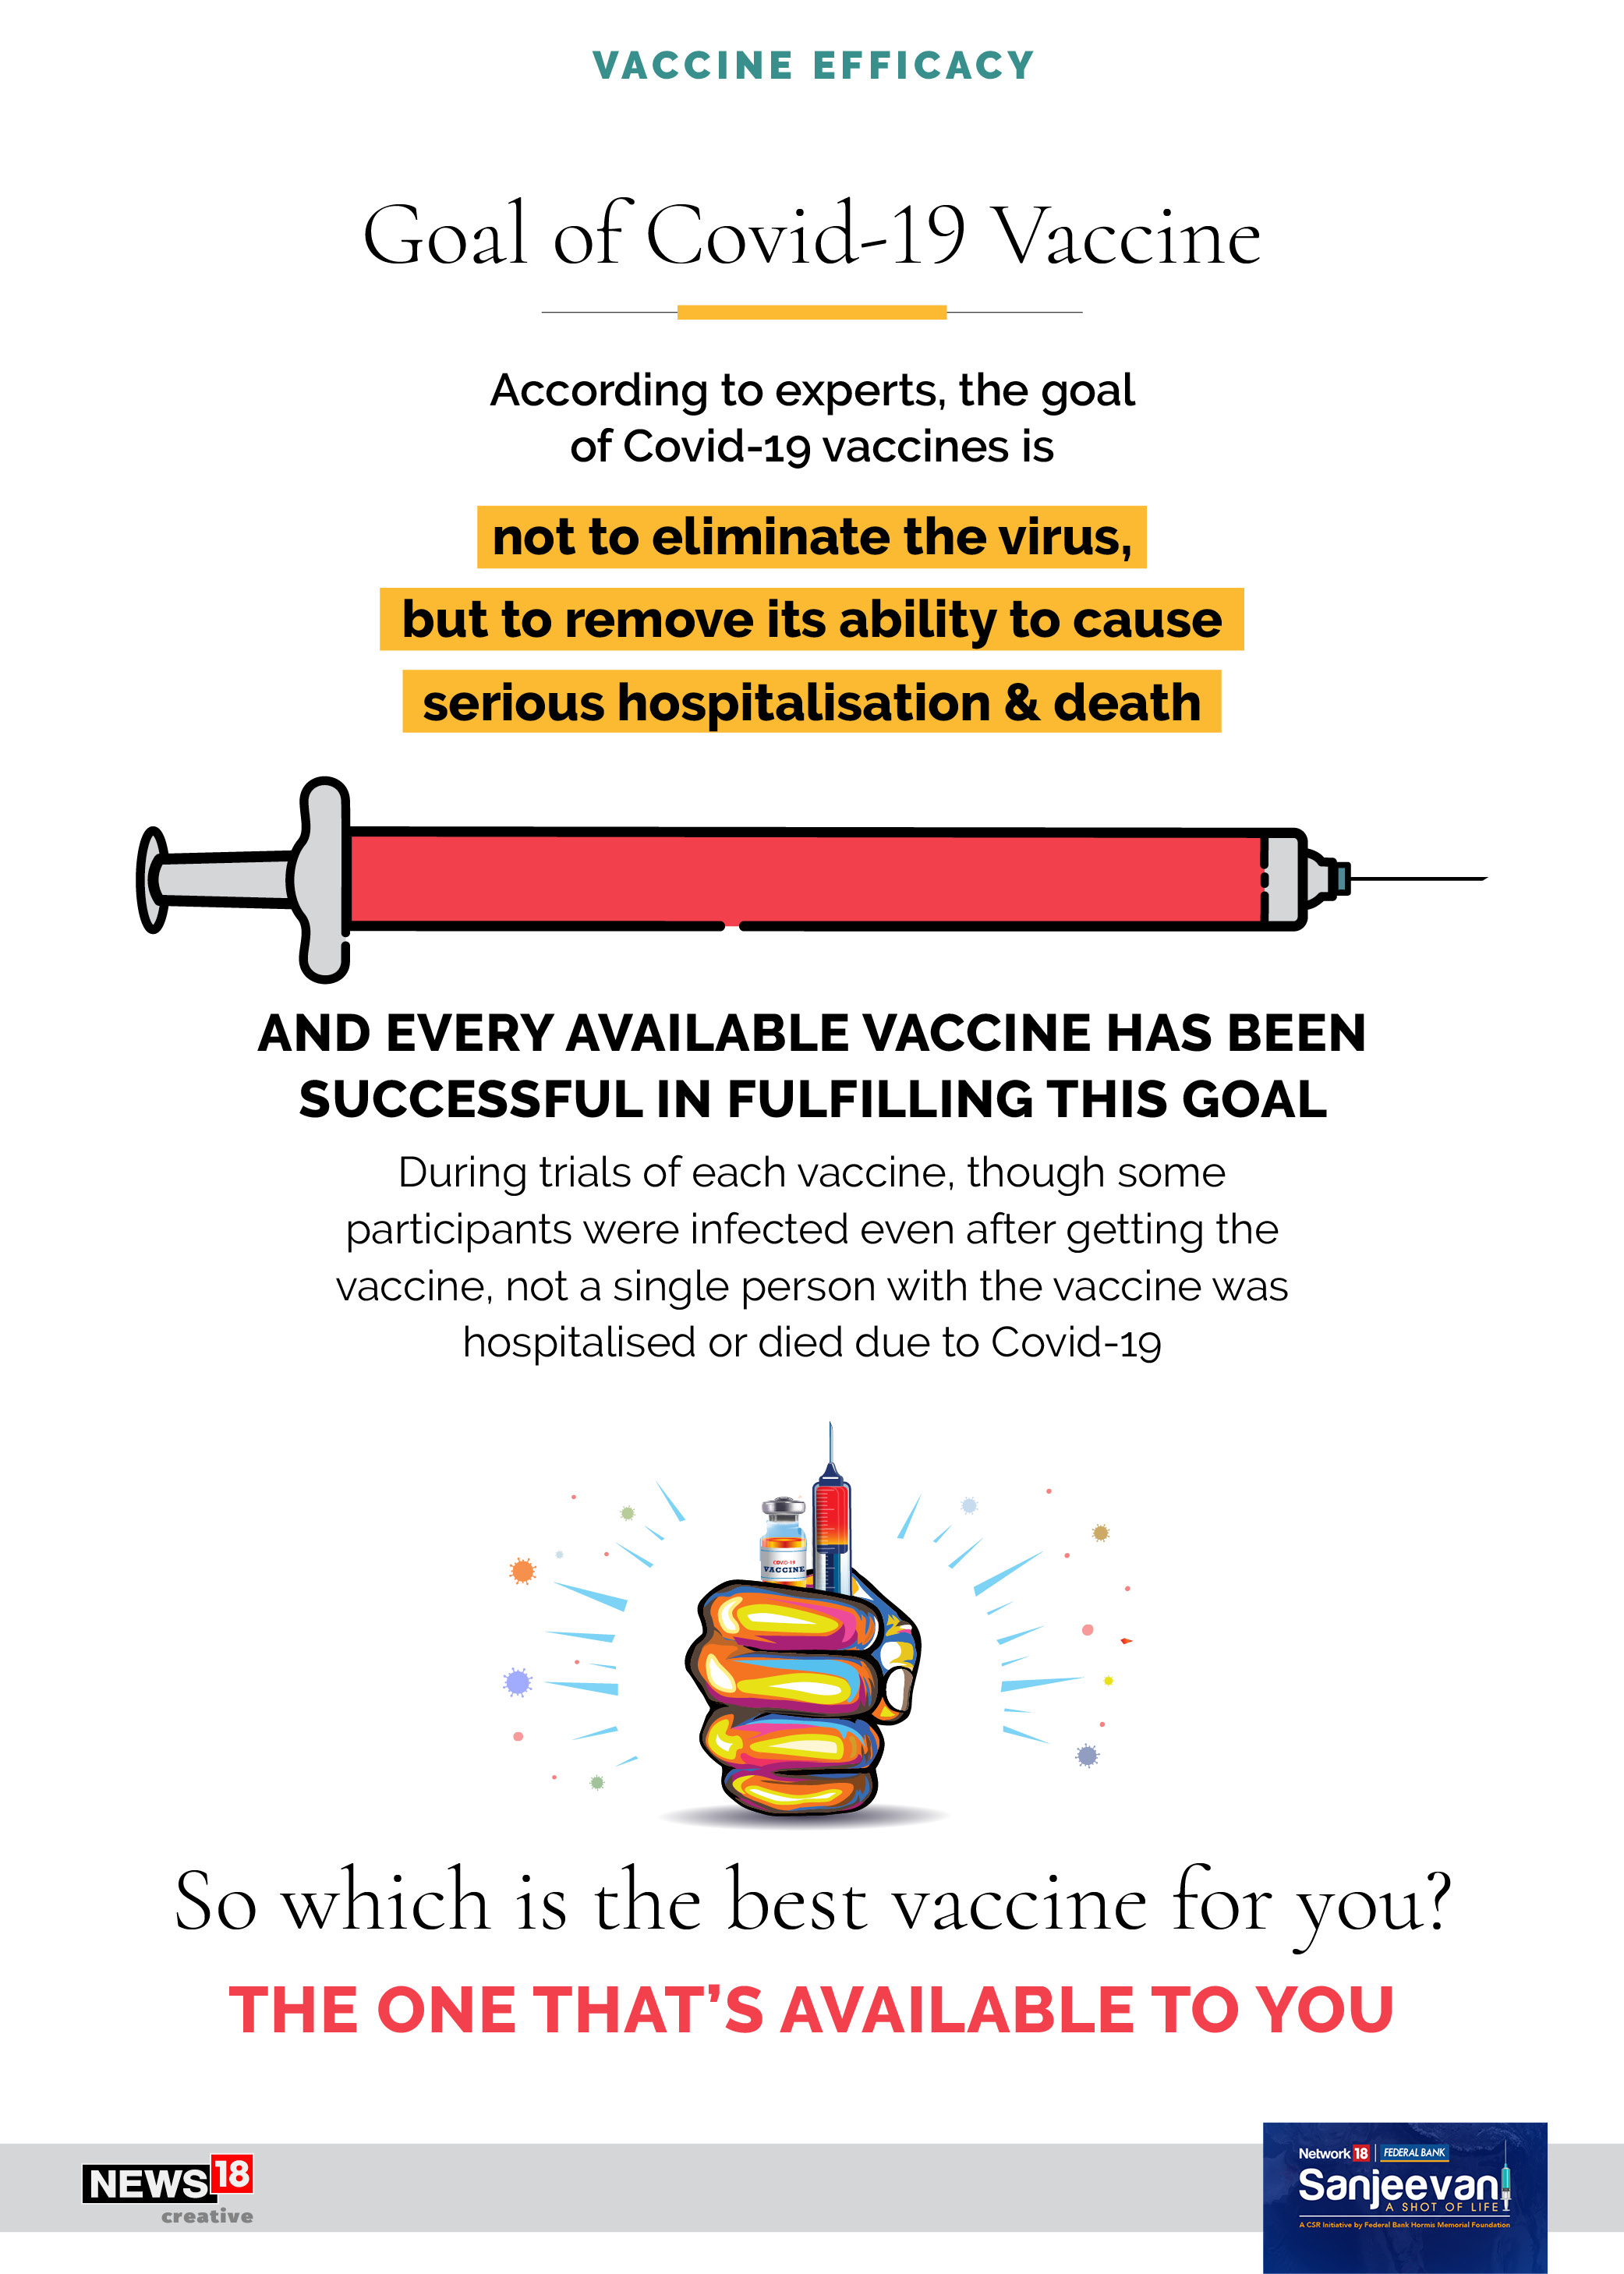 Is vaccine efficacy a good measure of effectiveness?